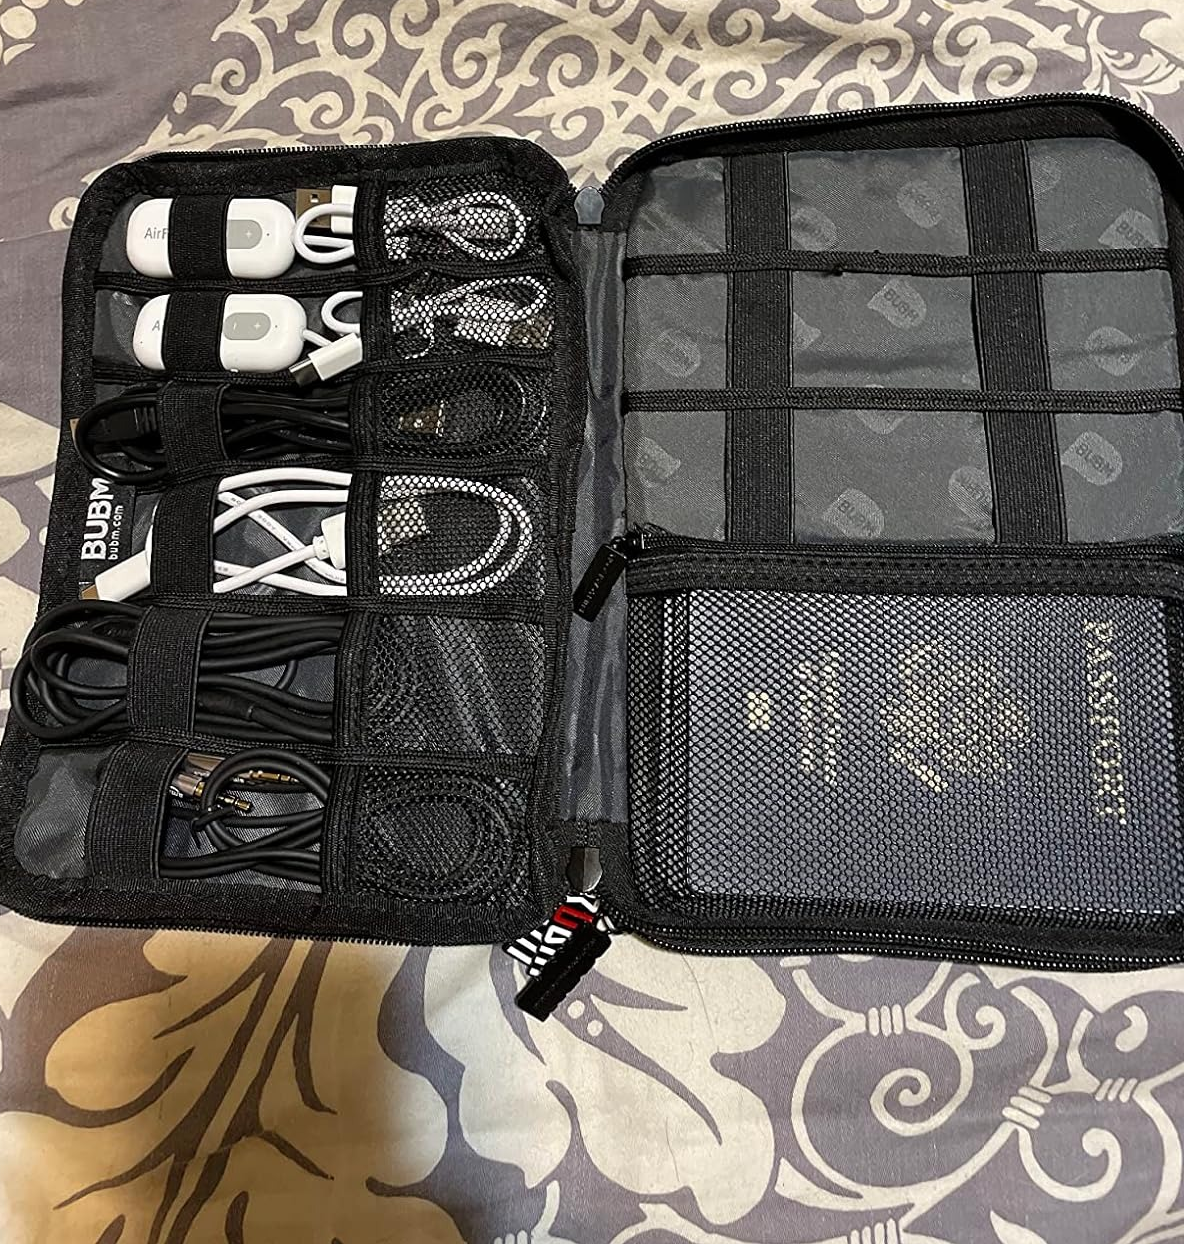 the reviewer pouch with electronic's cords and a passport